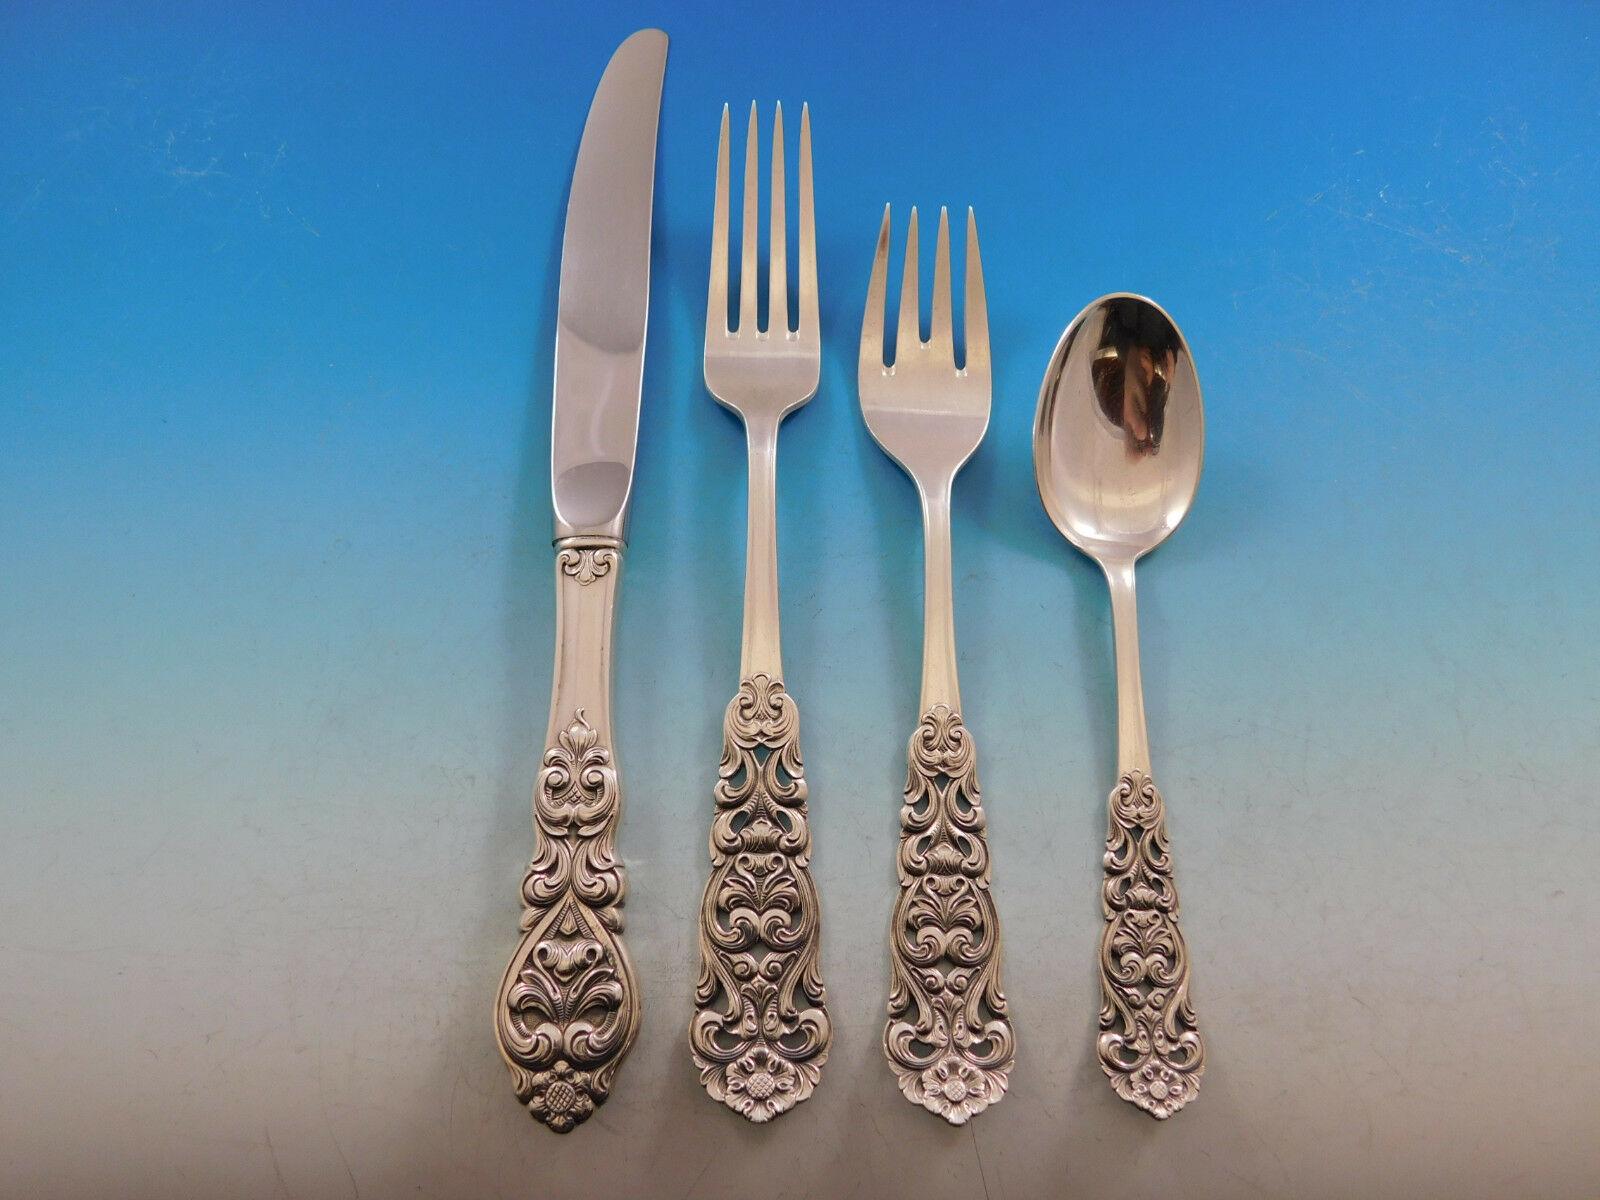 Dinner size Valdres by Th. Marthinsen (Norway) sterling silver flatware set with ornate pierced handle, 73 pieces. This set includes:

12 dinner size knives, 9 1/4